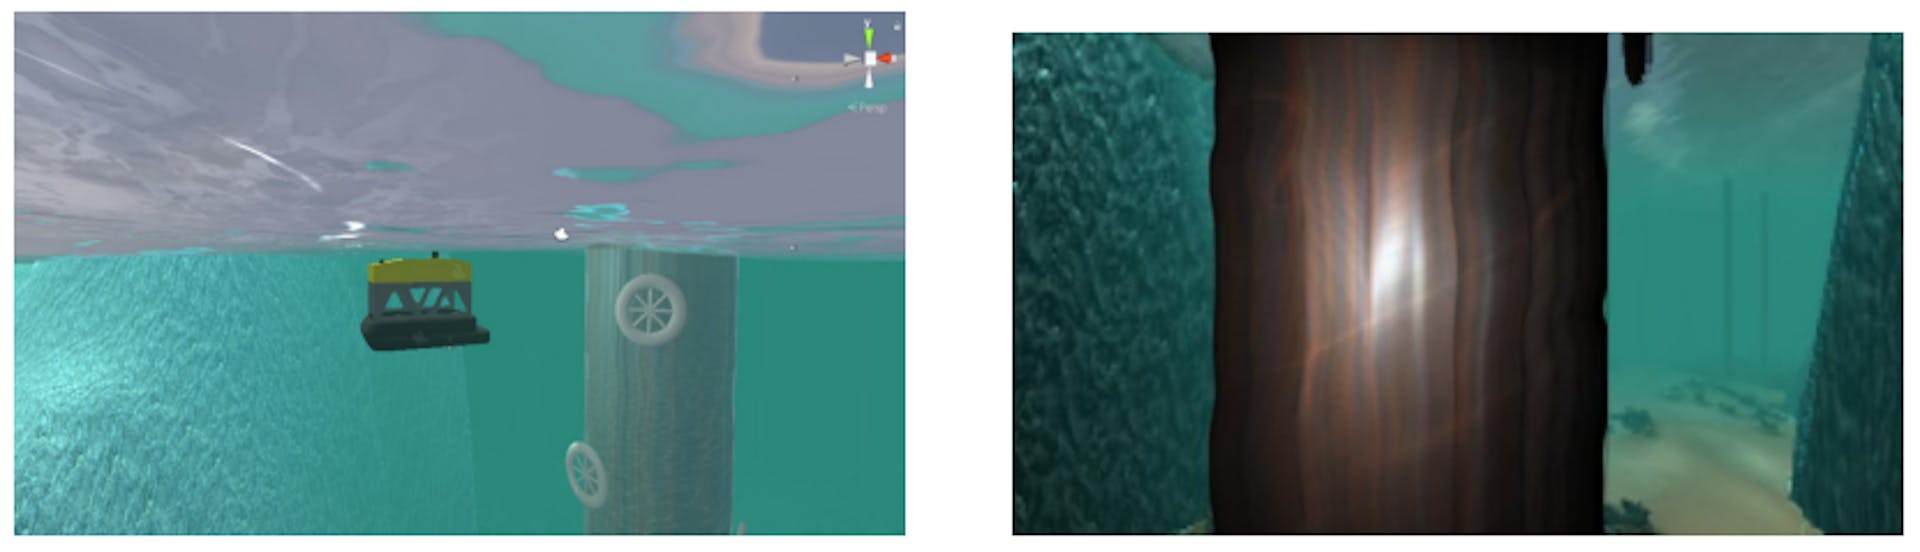 Fig. 3. Overview of simulated scene in underwater simulator (top) and the simulated image captured by the ROV (bottom).